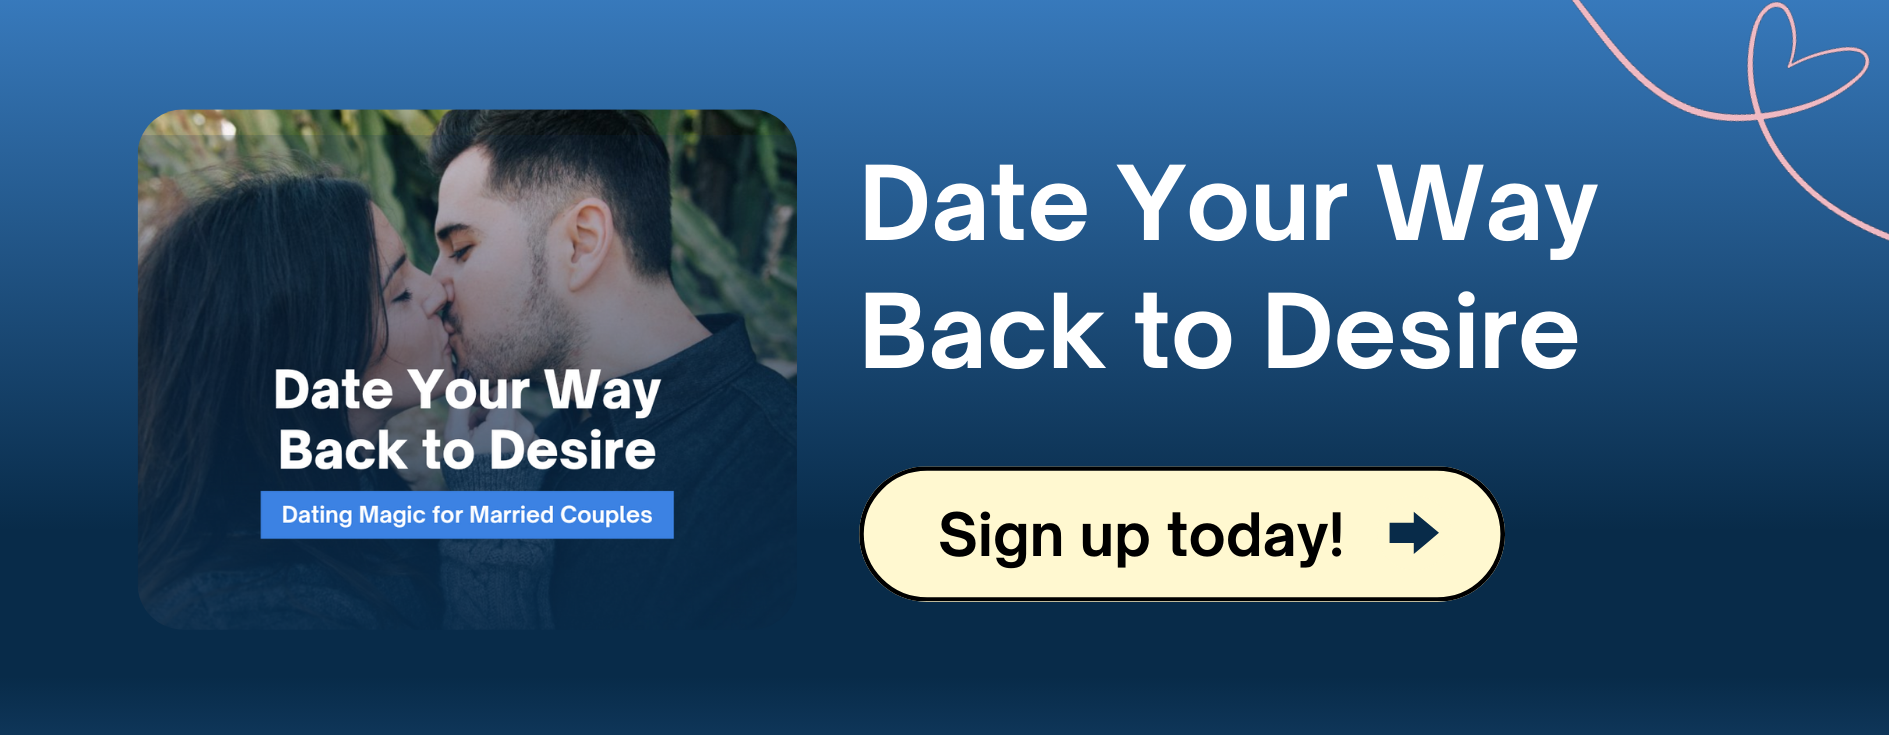 Date Your Way Back to Desire